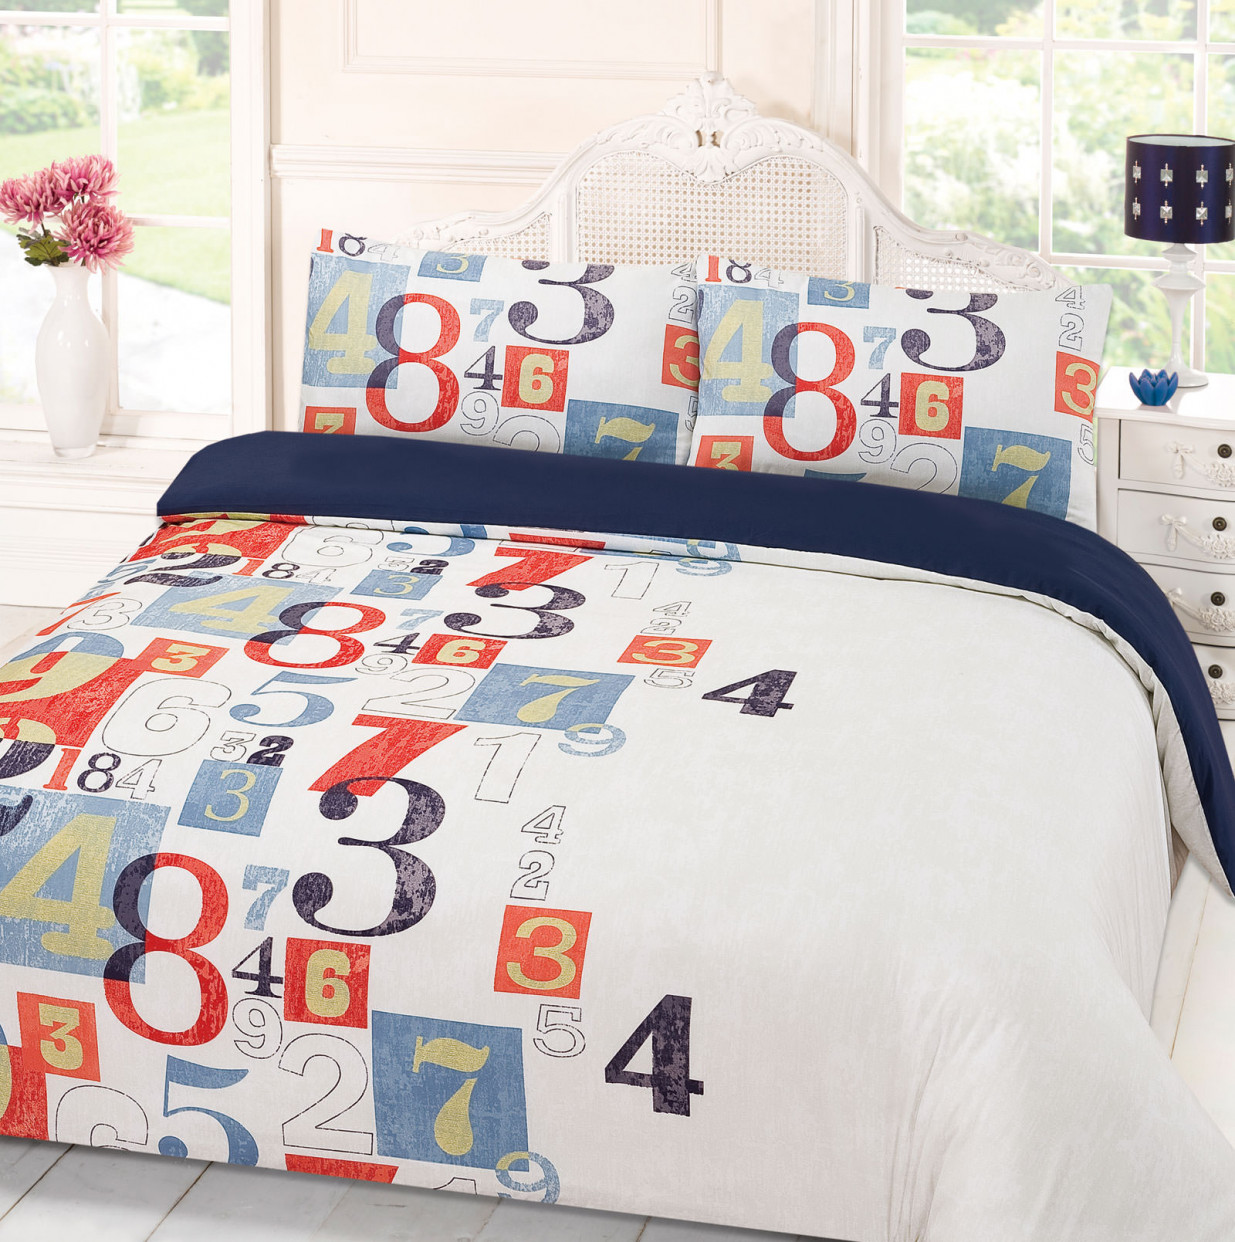 Duvet Cover with Pillowcase Bedding Set Digit Blue Yellow - Double>